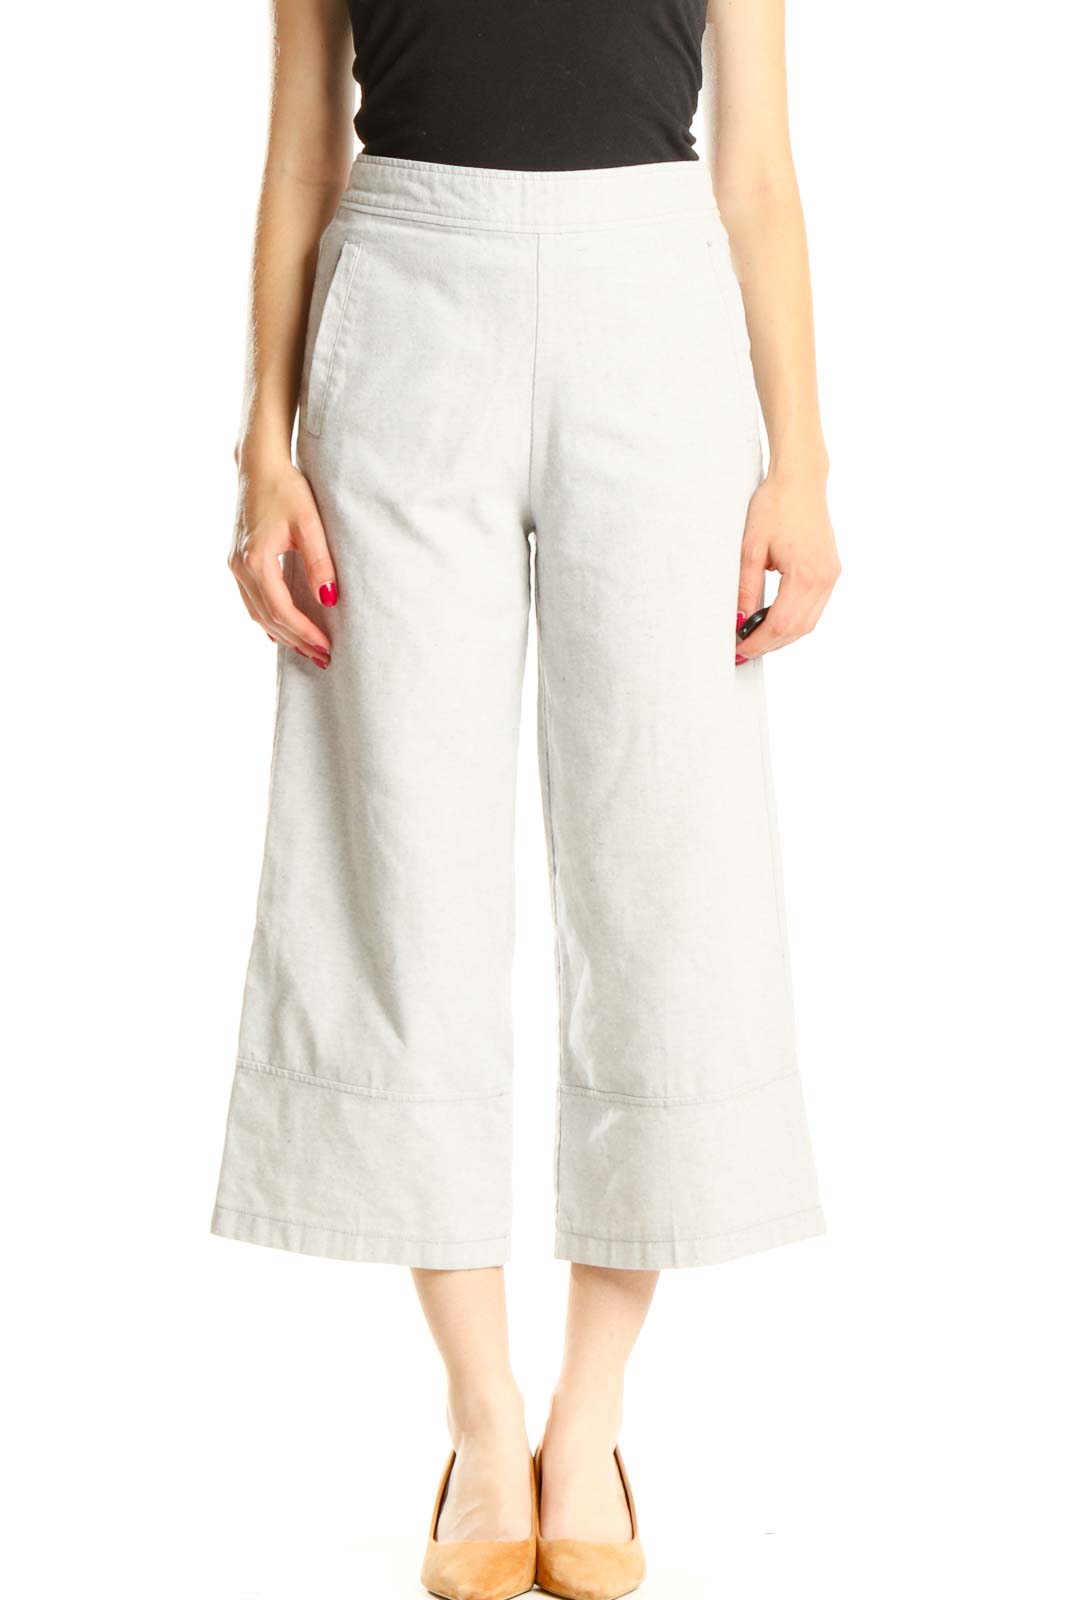 White All Day Wear Culottes Pants Front